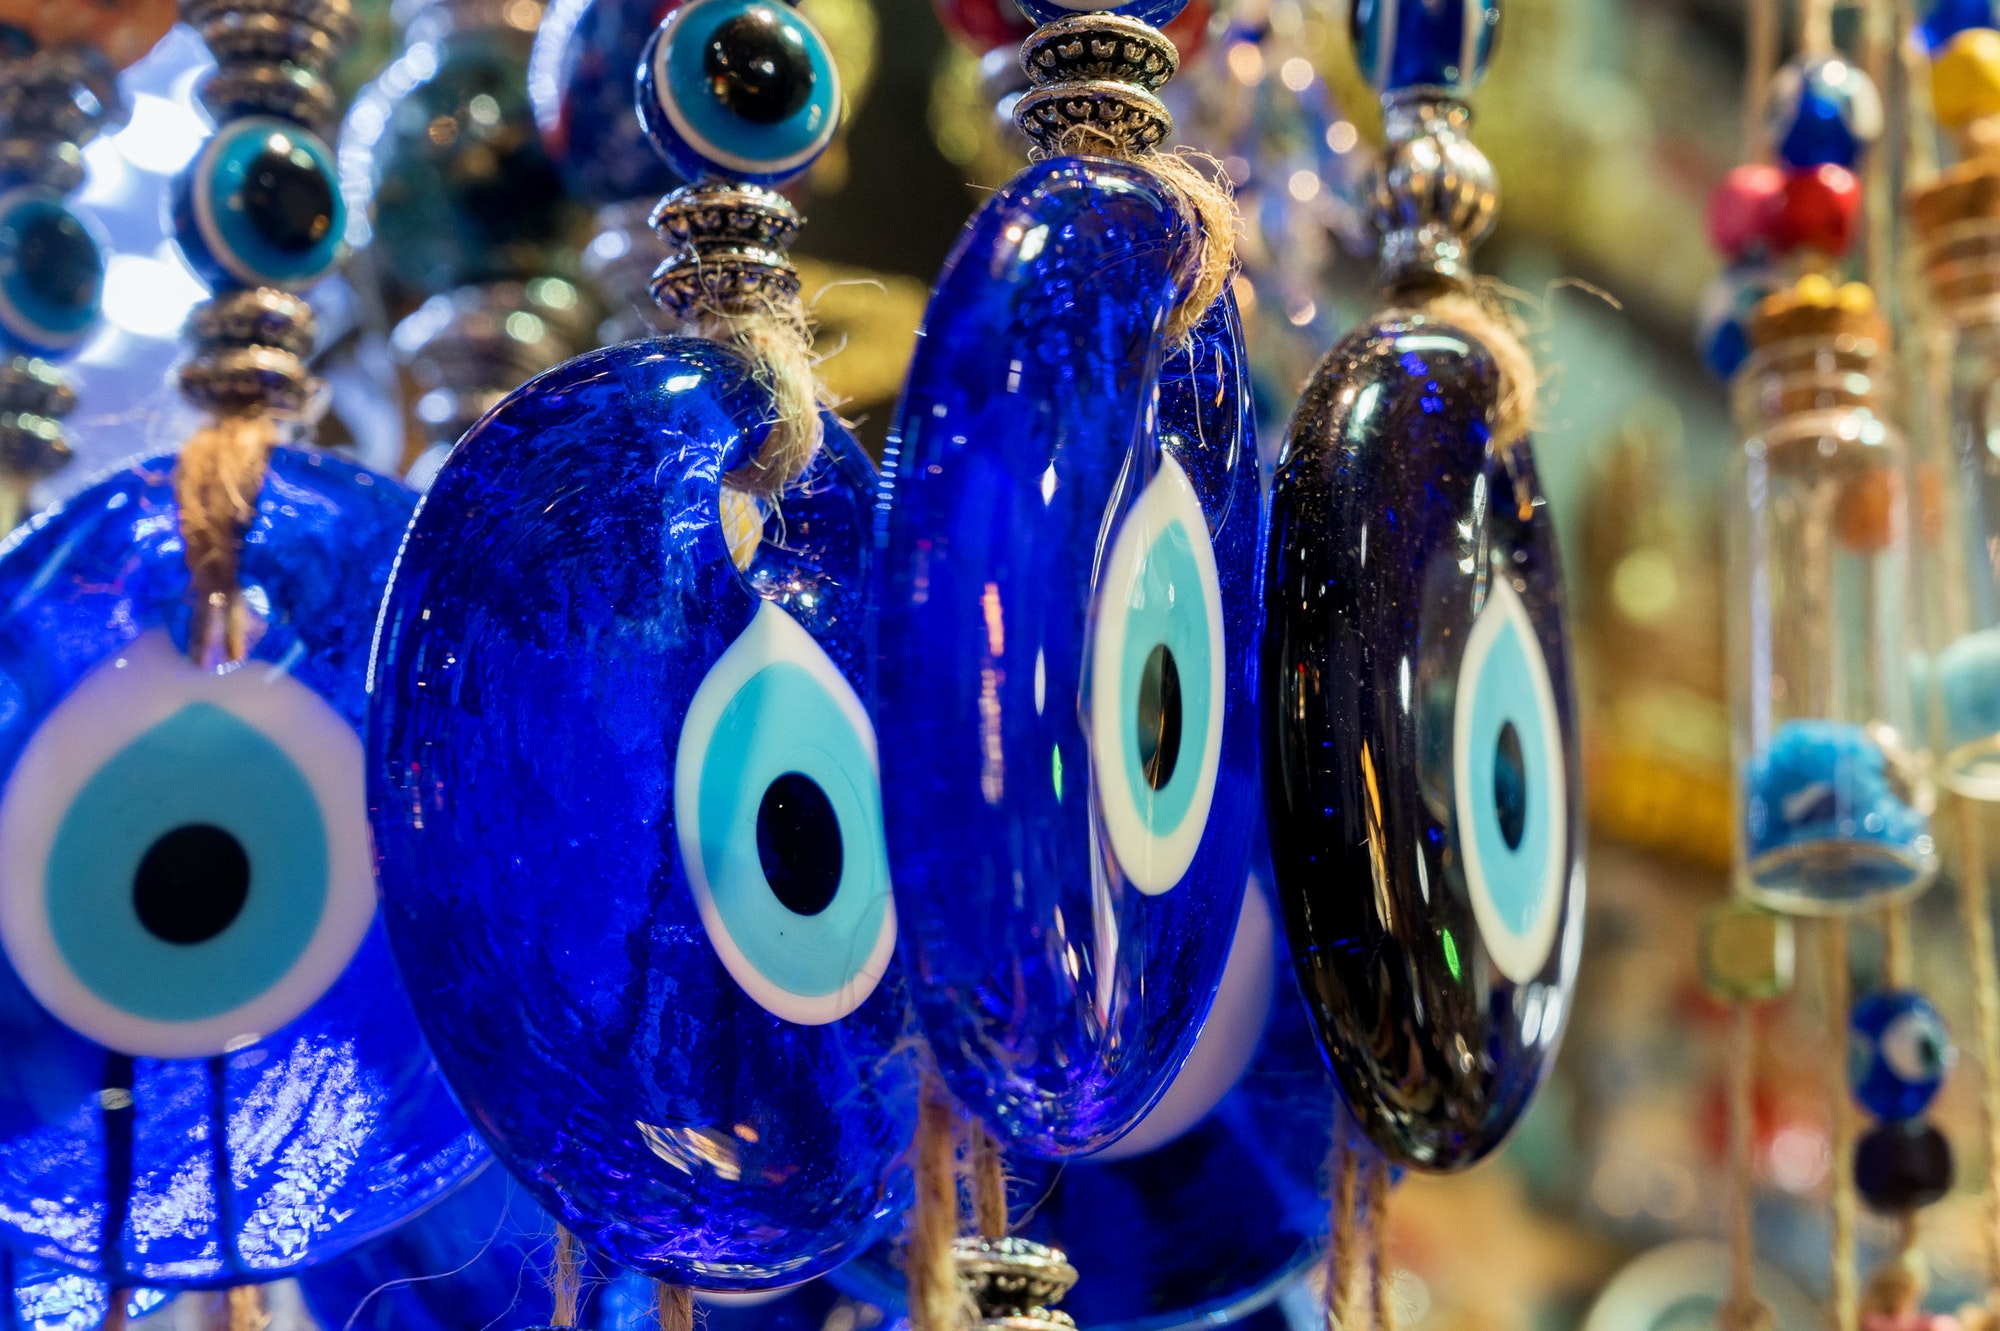 Istanbul, Turkey - January 2022 - Souvenirs for tourists at the Grand Bazaar